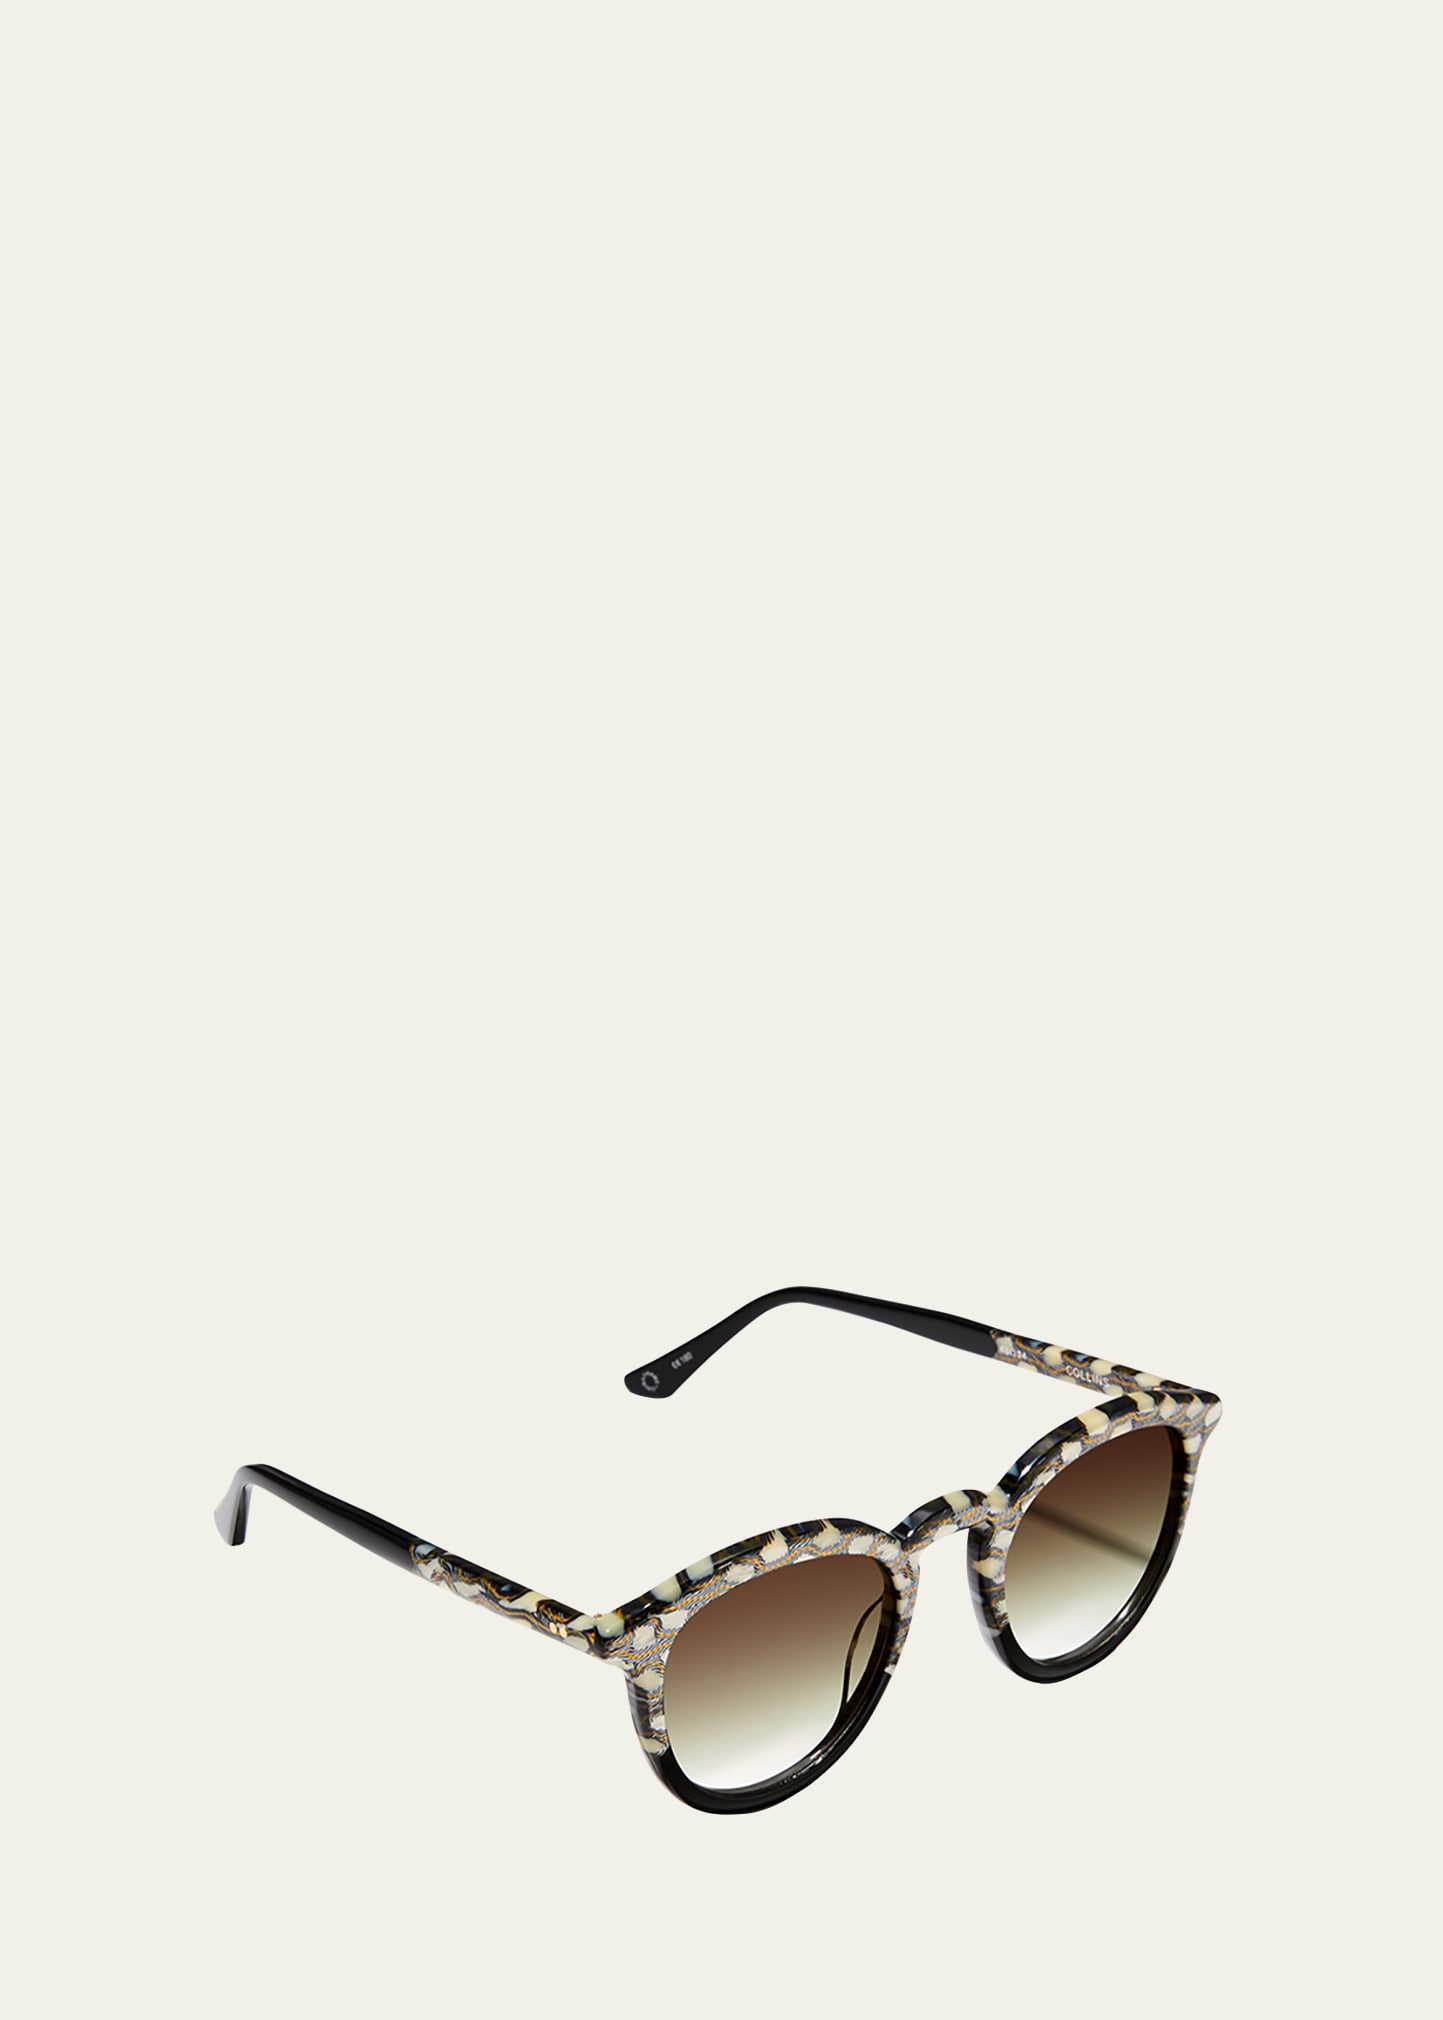 KREWE COLLINS ROUND PATTERNED ACETATE SUNGLASSES